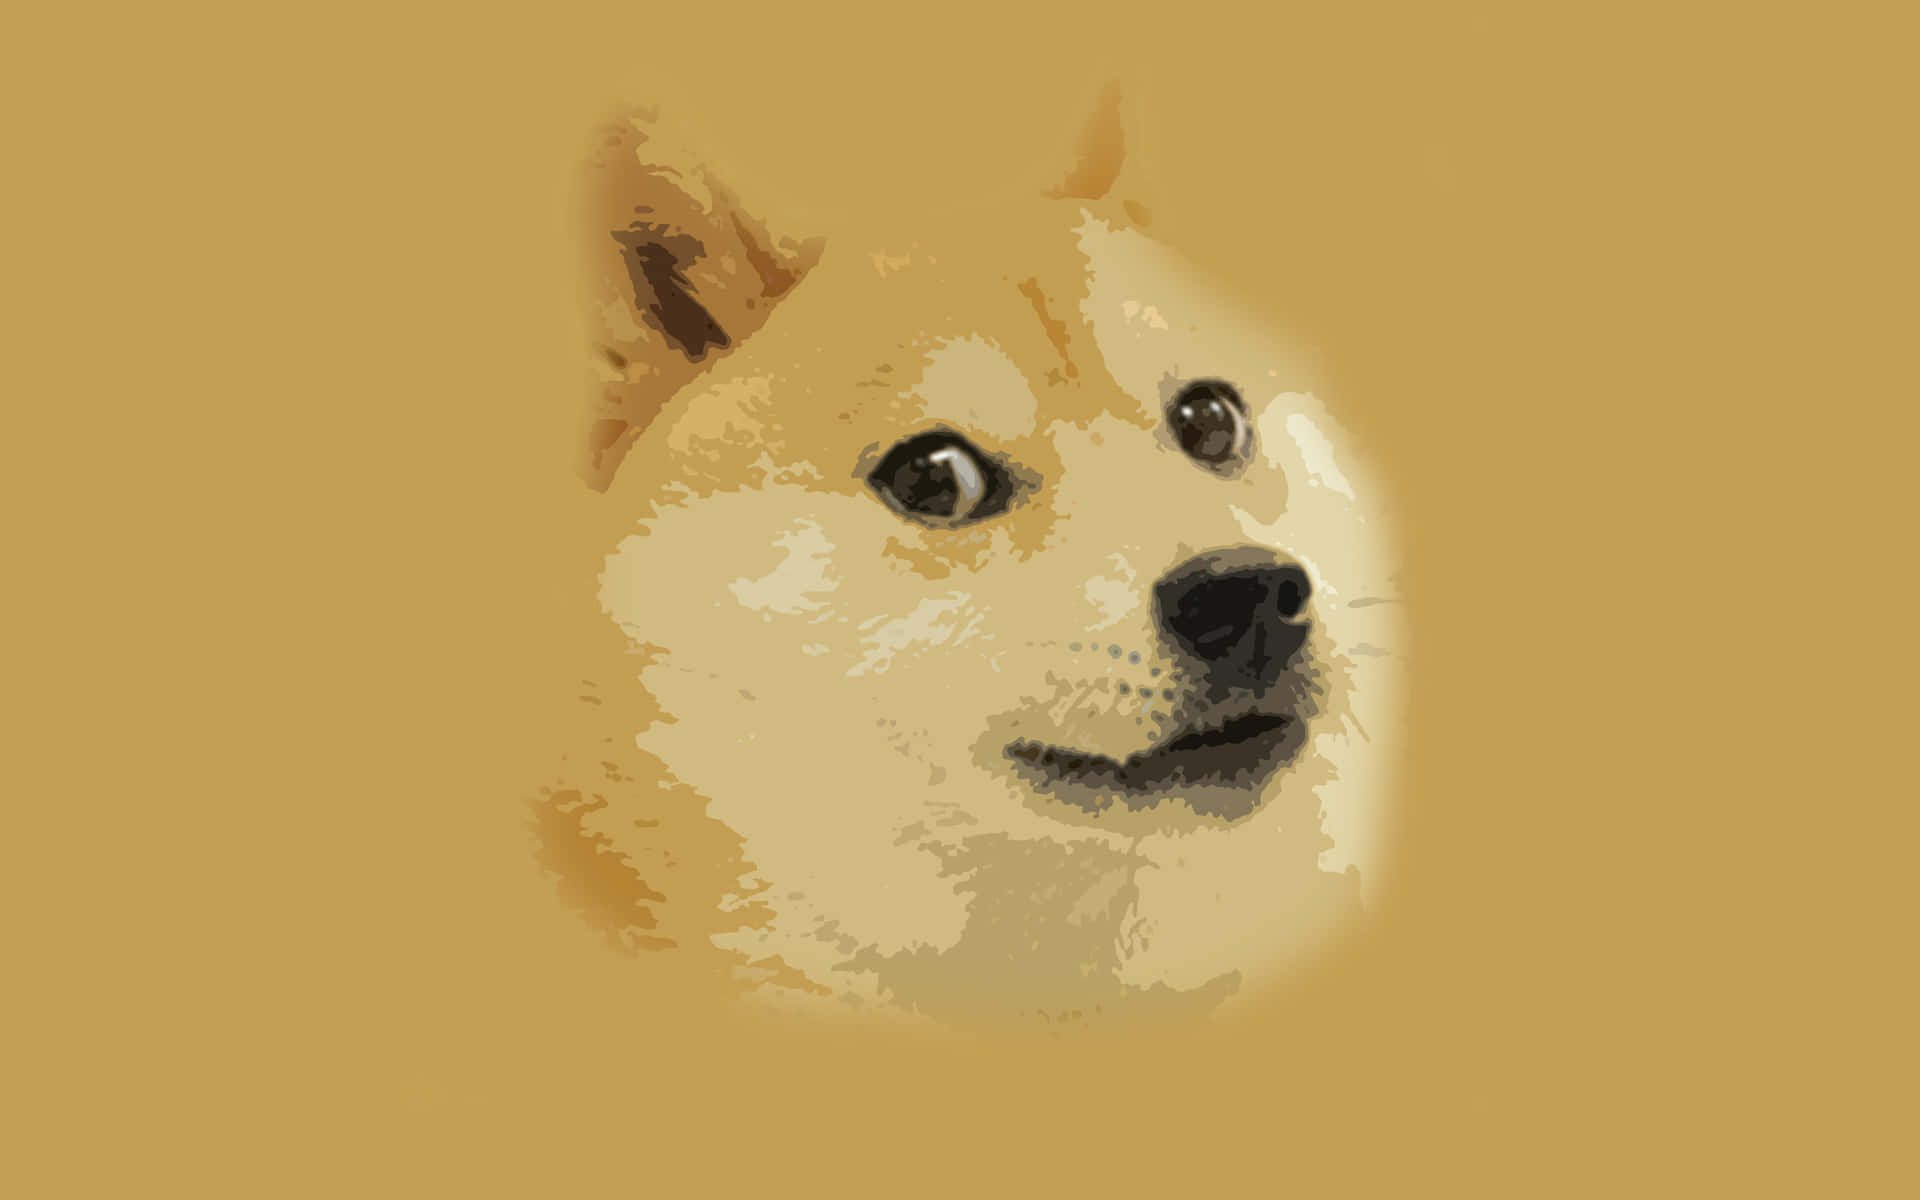 A Dog With A Big Mouth On A Brown Background Wallpaper